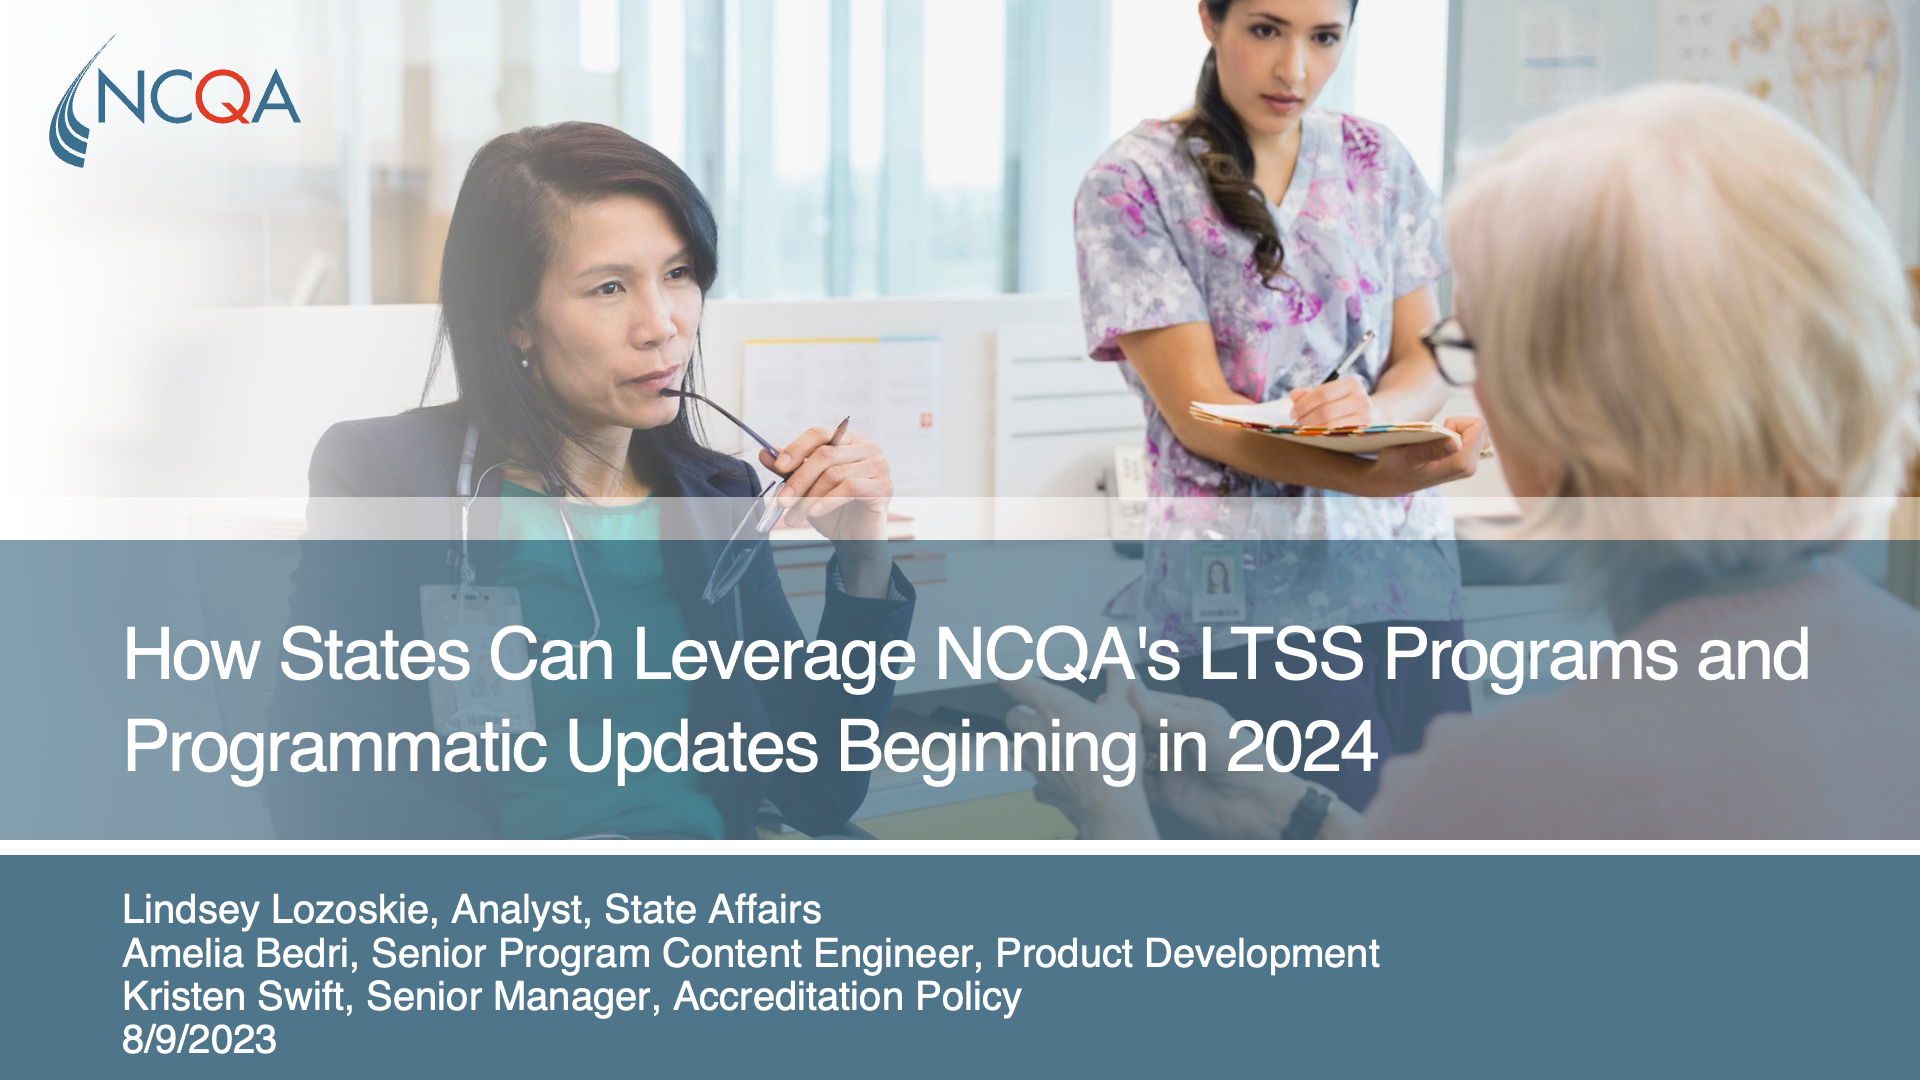 How States Can Leverage NCQA’s LTSS Programs and Programmatic Updates